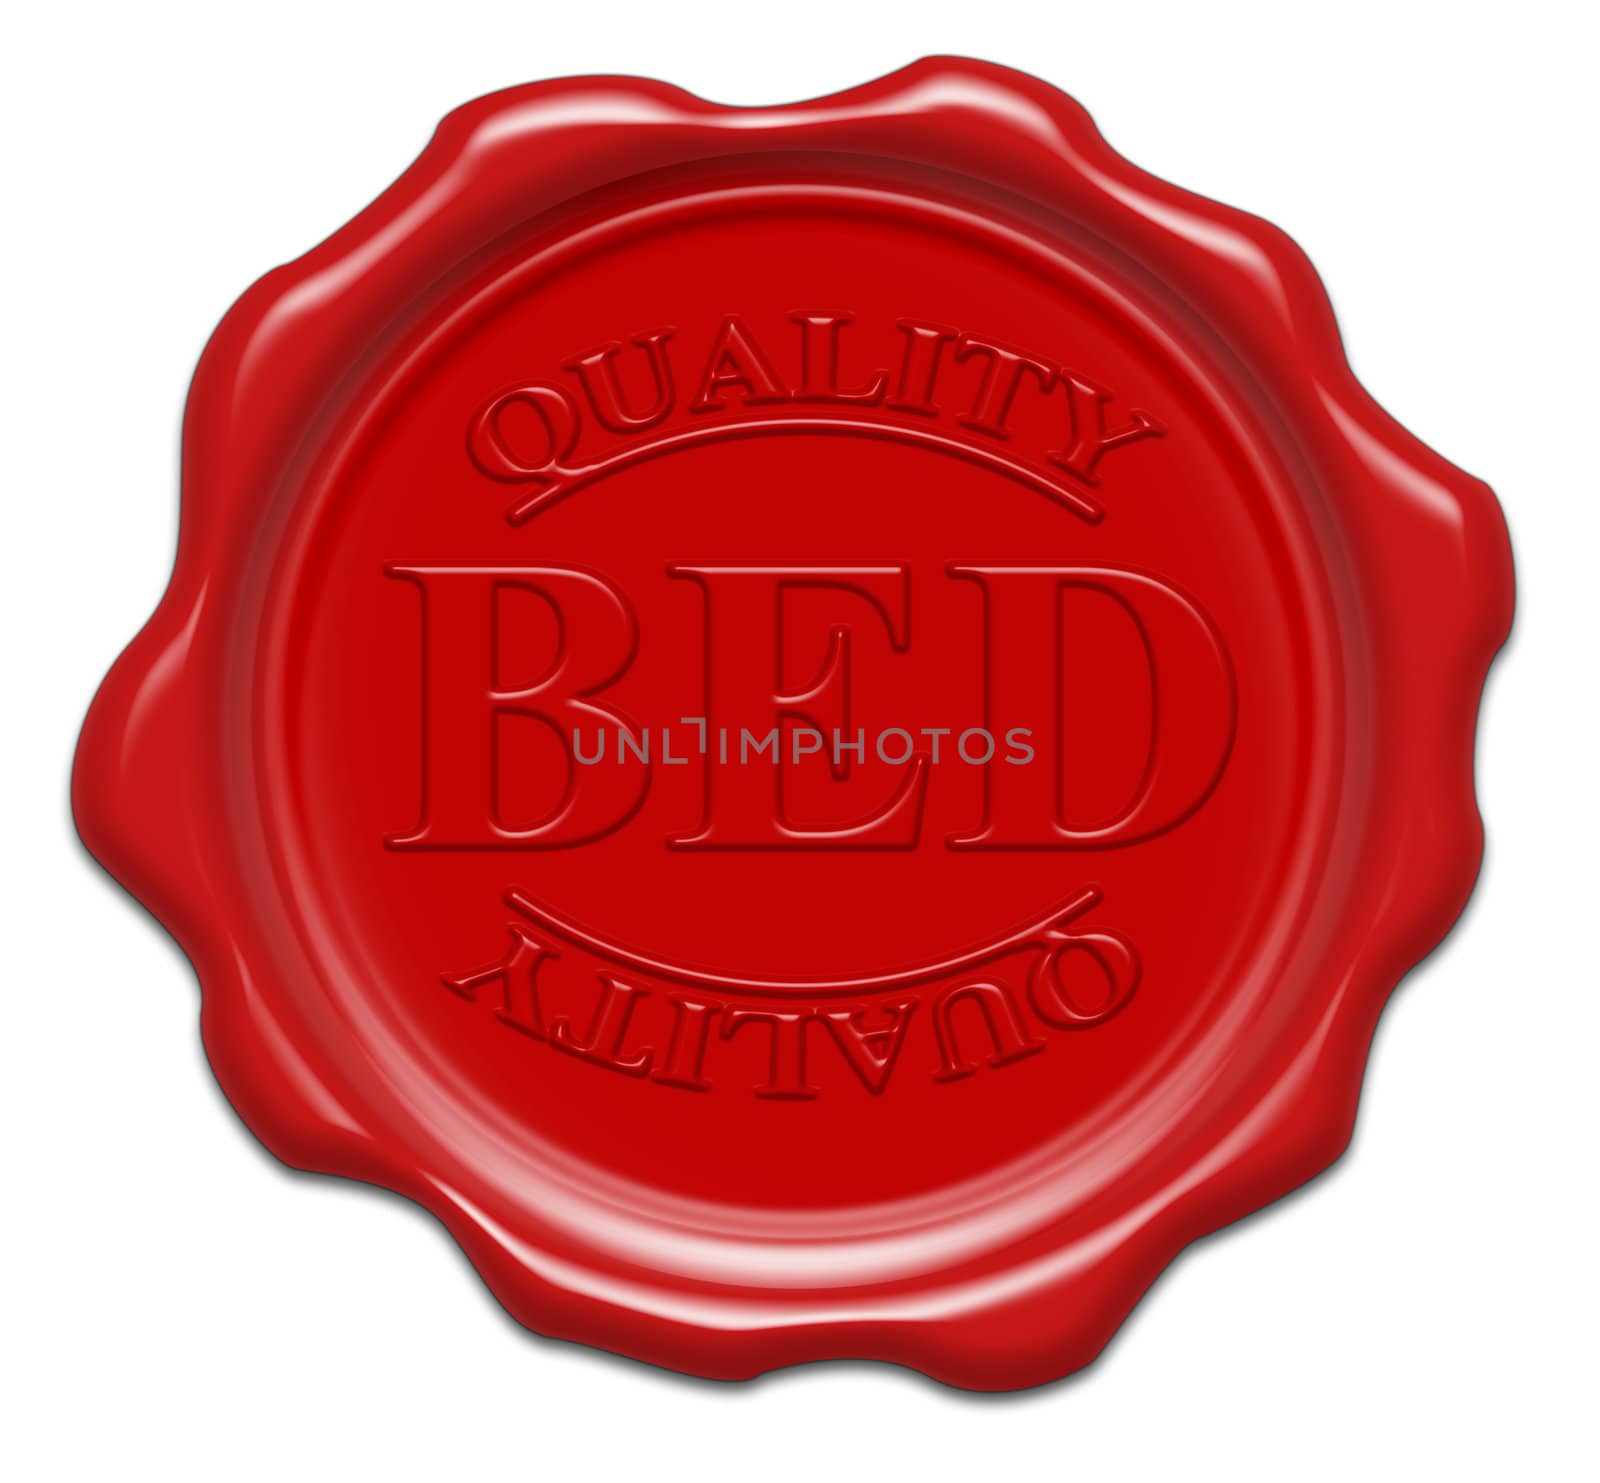 quality bed - illustration red wax seal isolated on white backgr by mozzyb